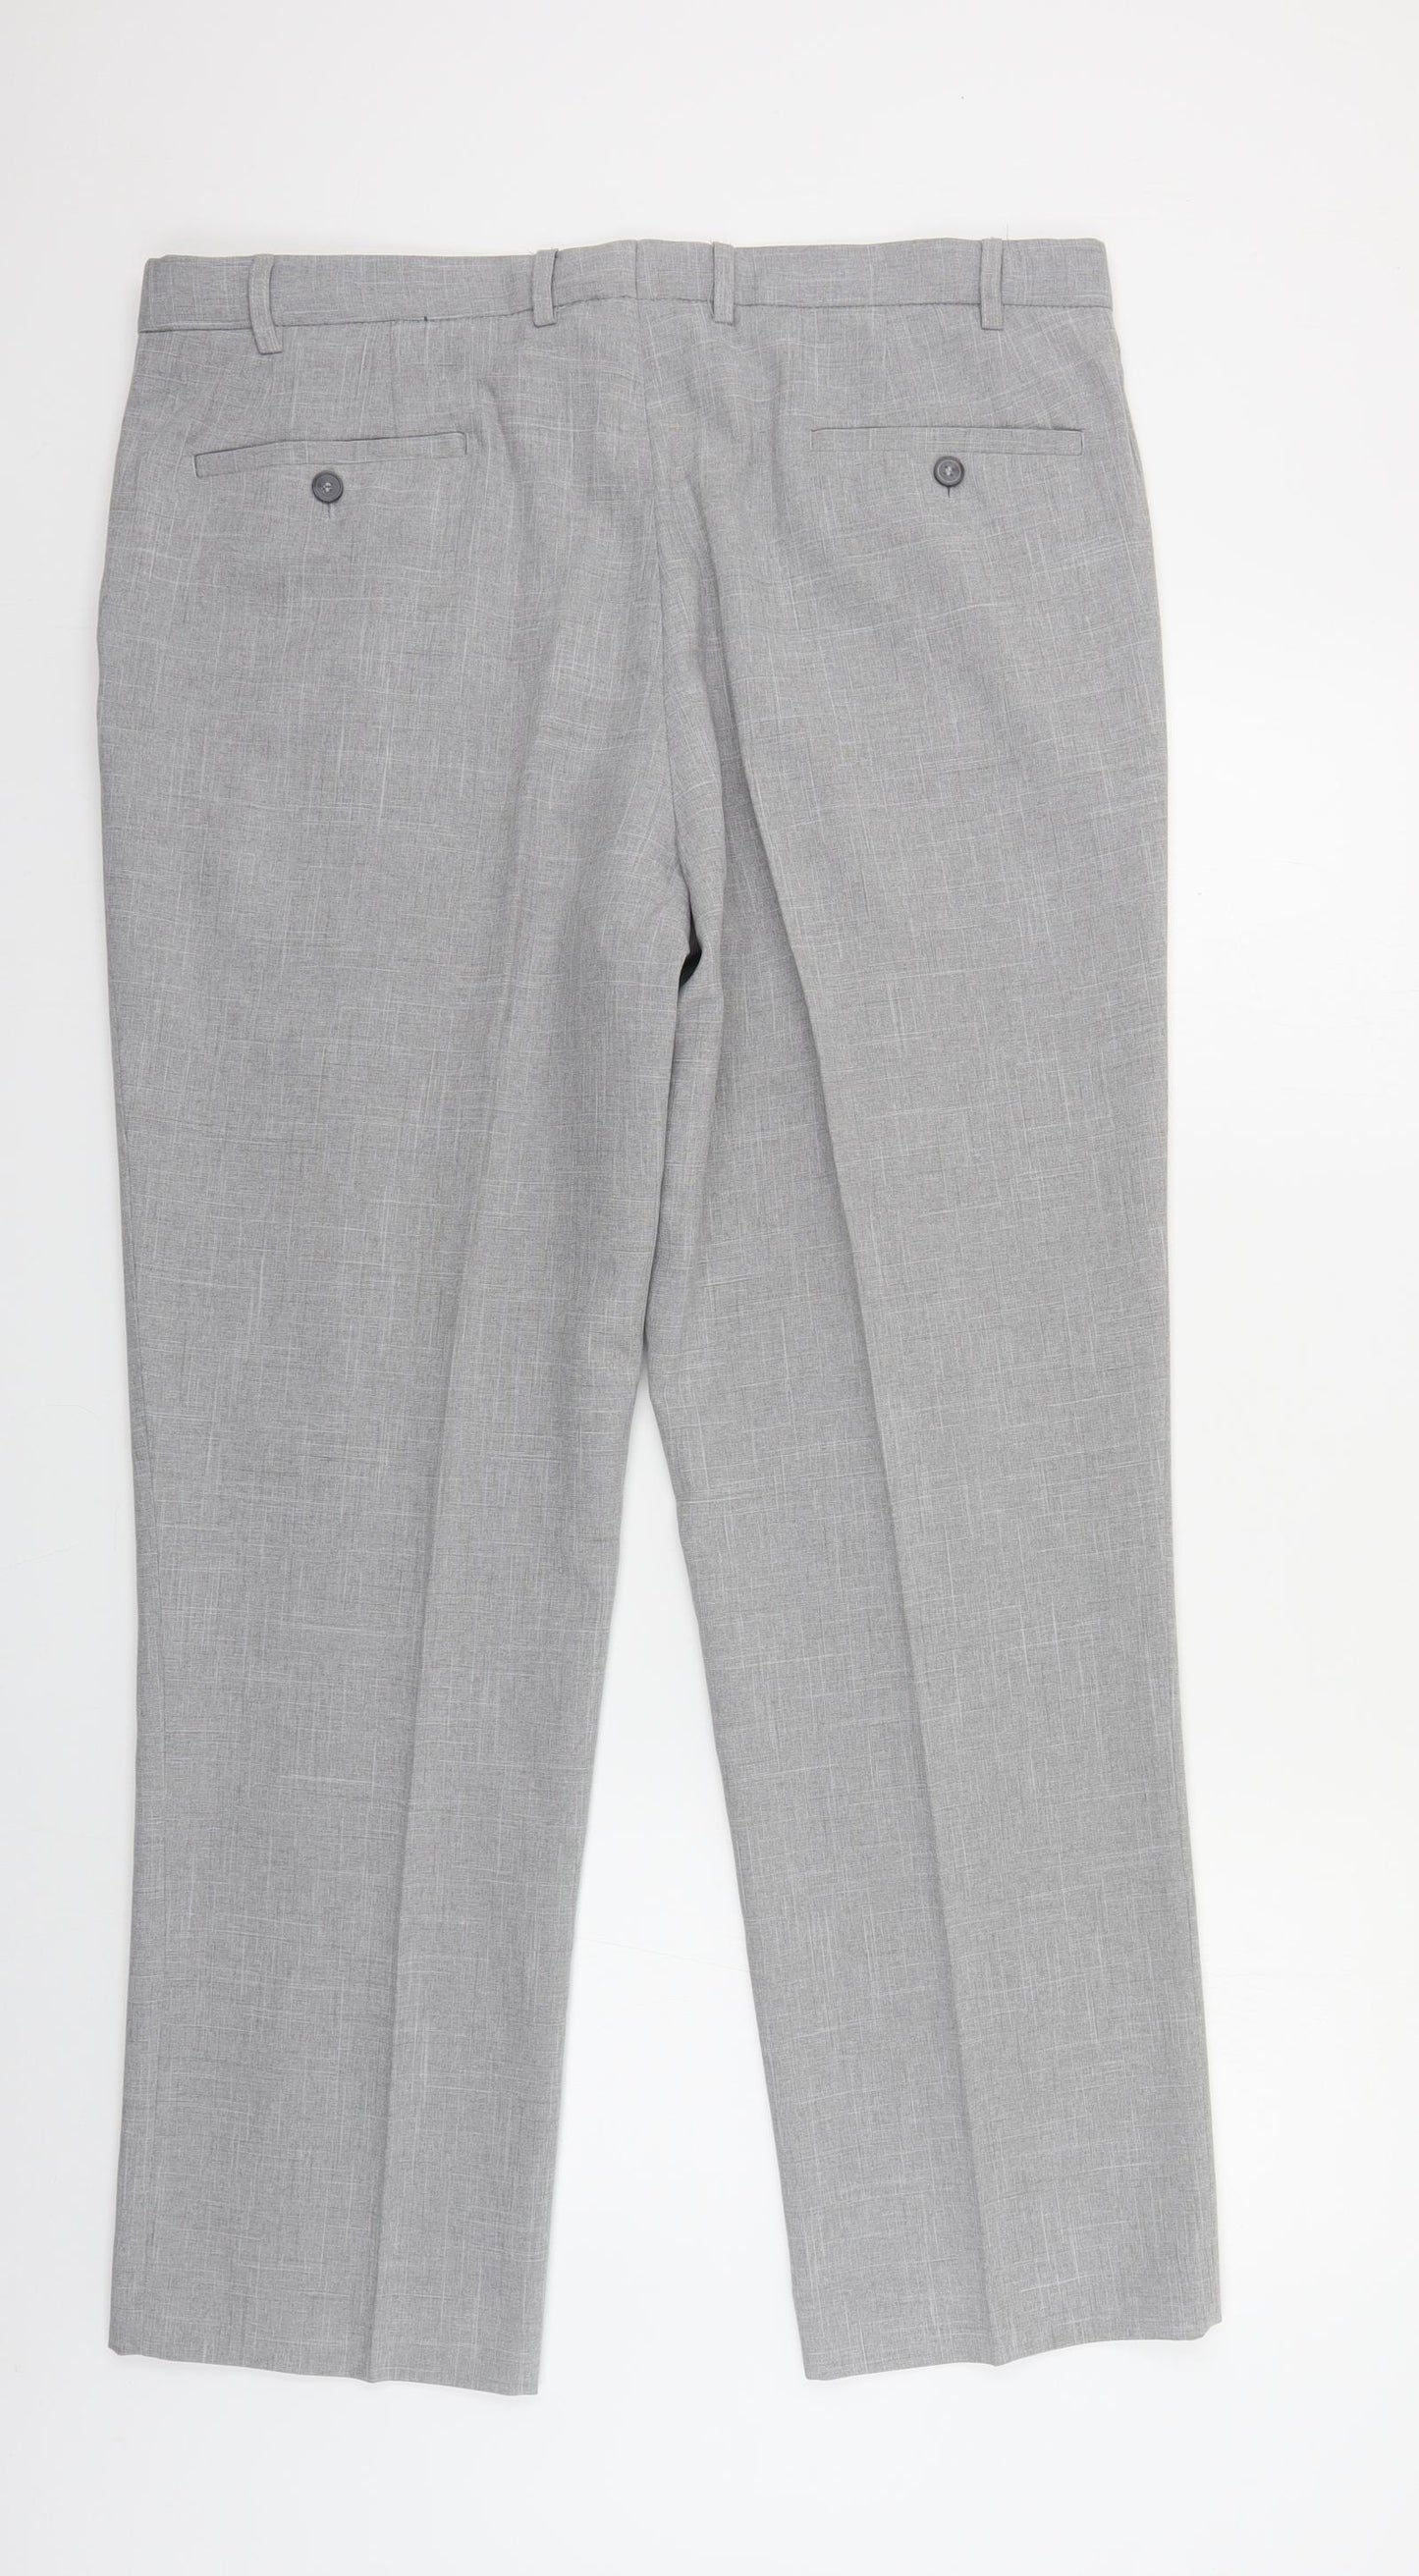 Matalan Mens Grey Polyester Dress Pants Trousers Size 38 in L31 in Regular Button